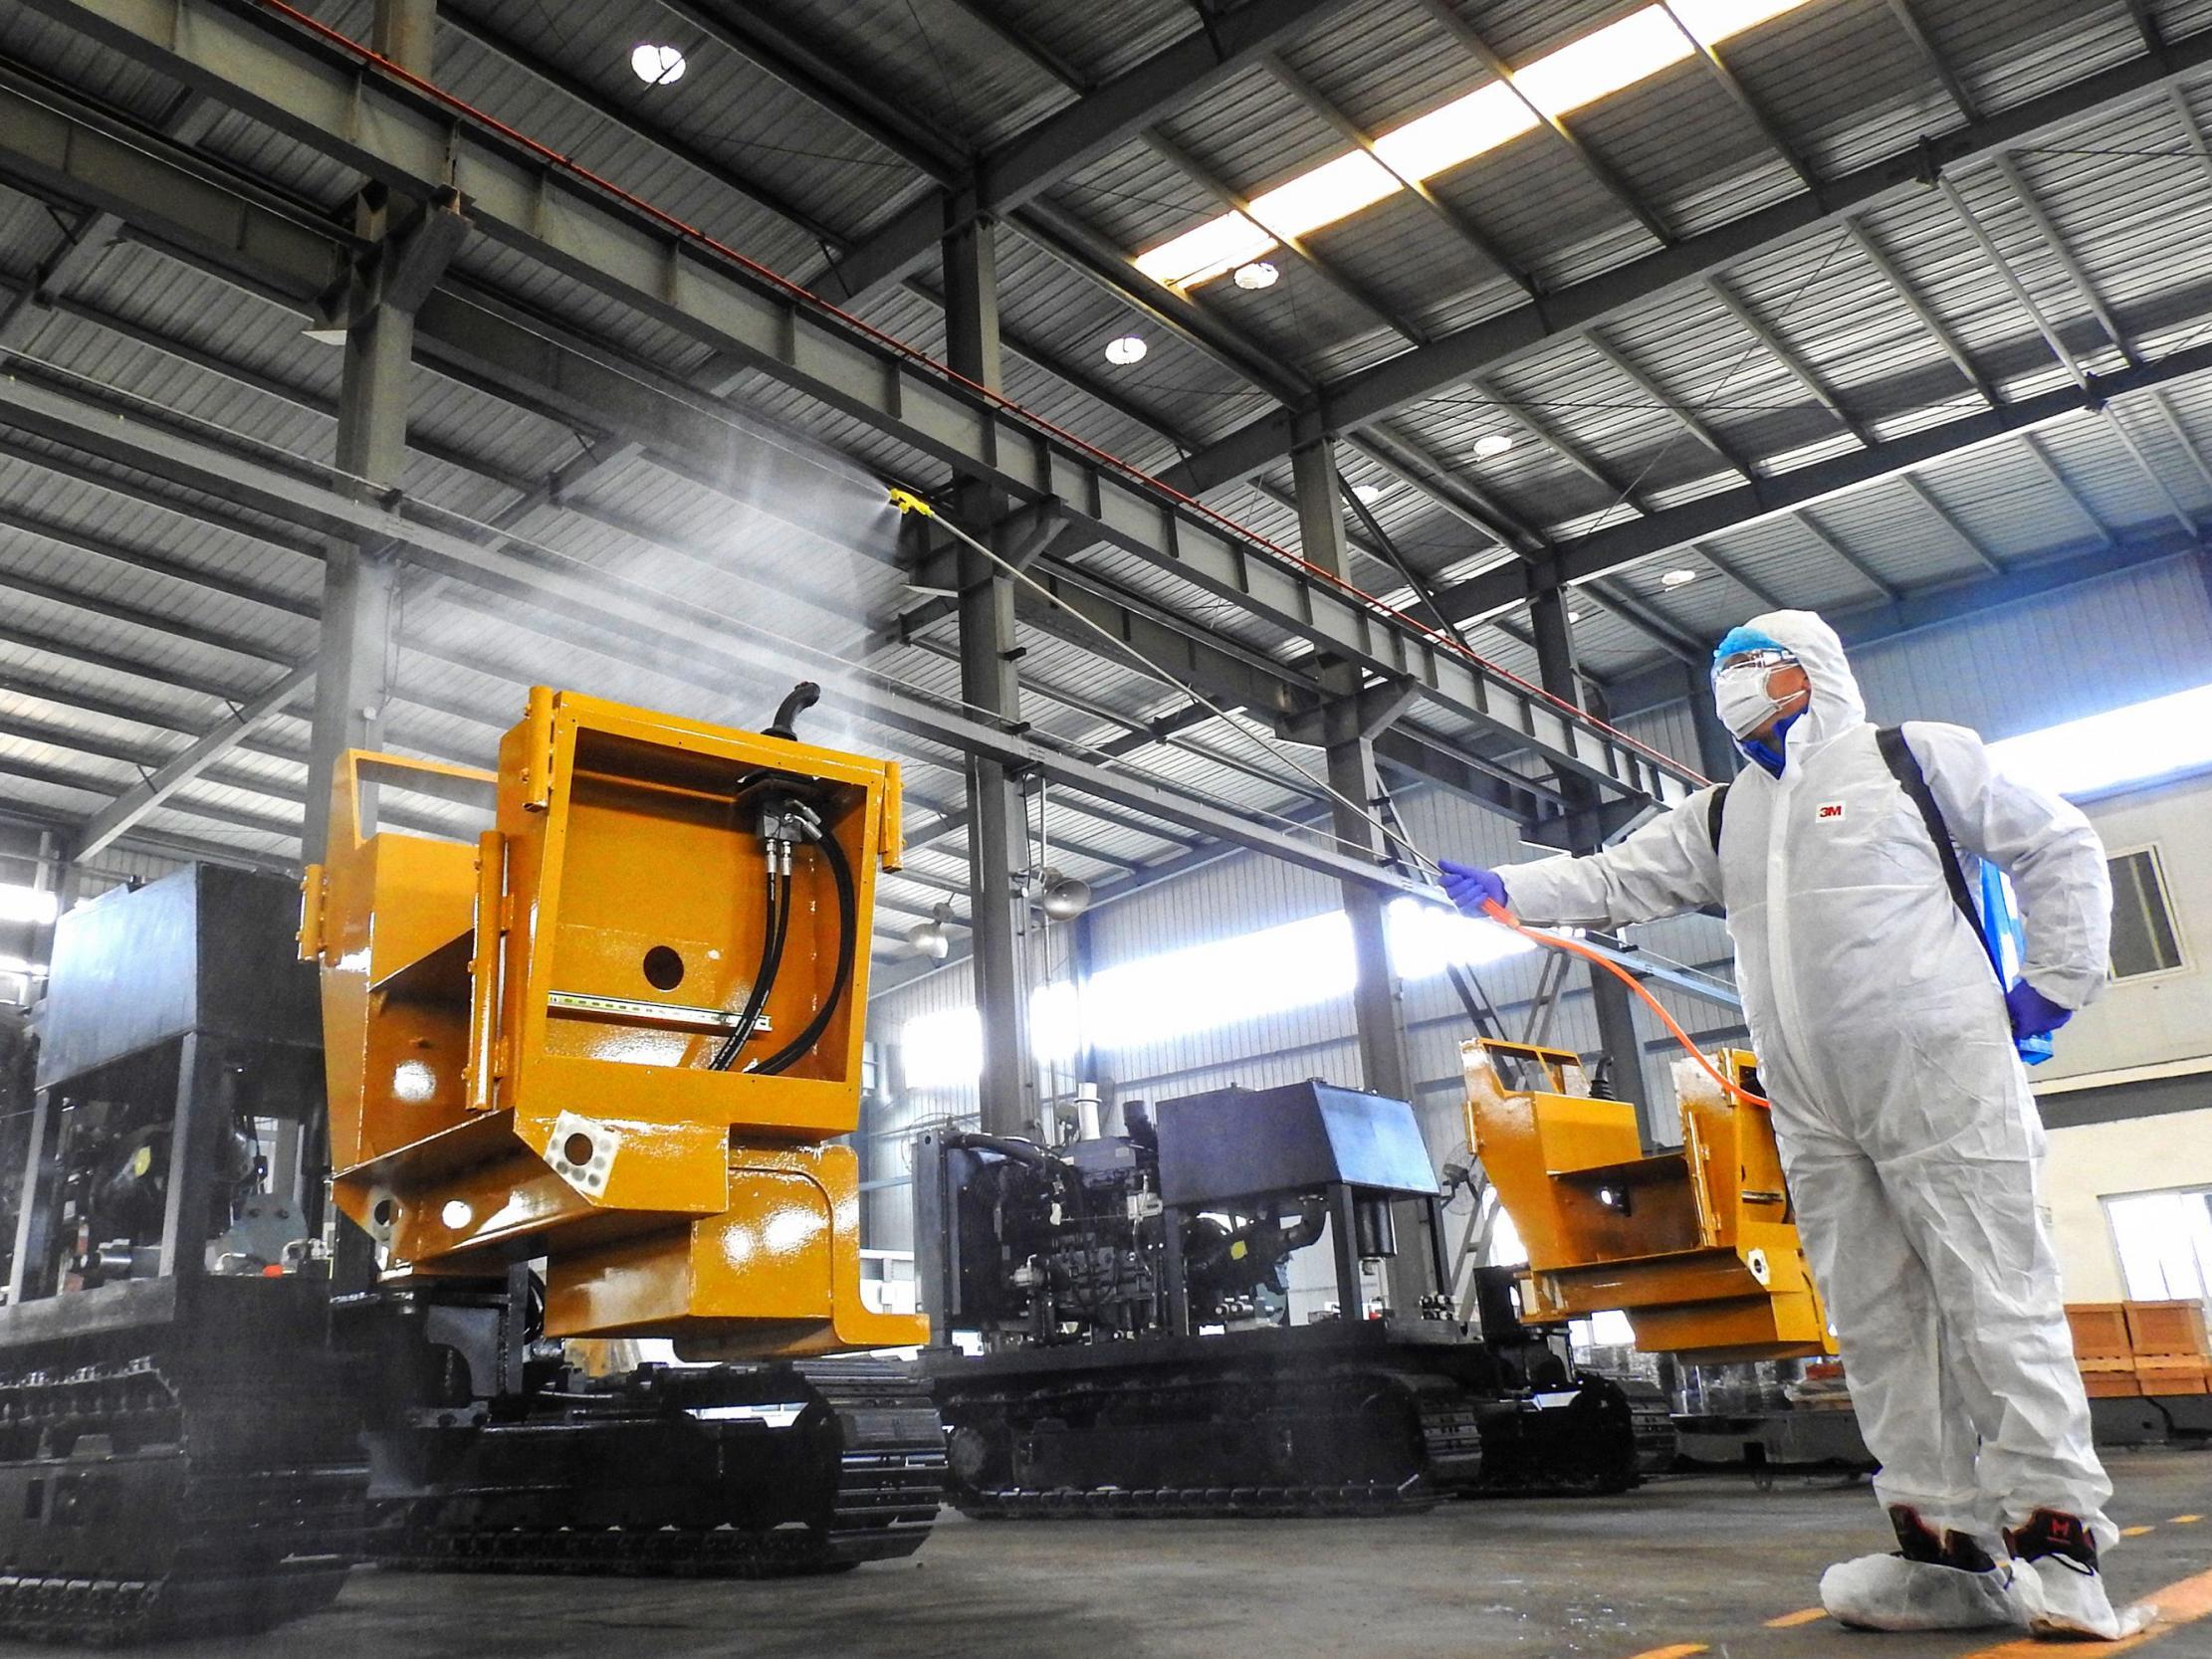 A worker disinfects machines at a factory in Lianyungang in China's eastern Jiangsu province